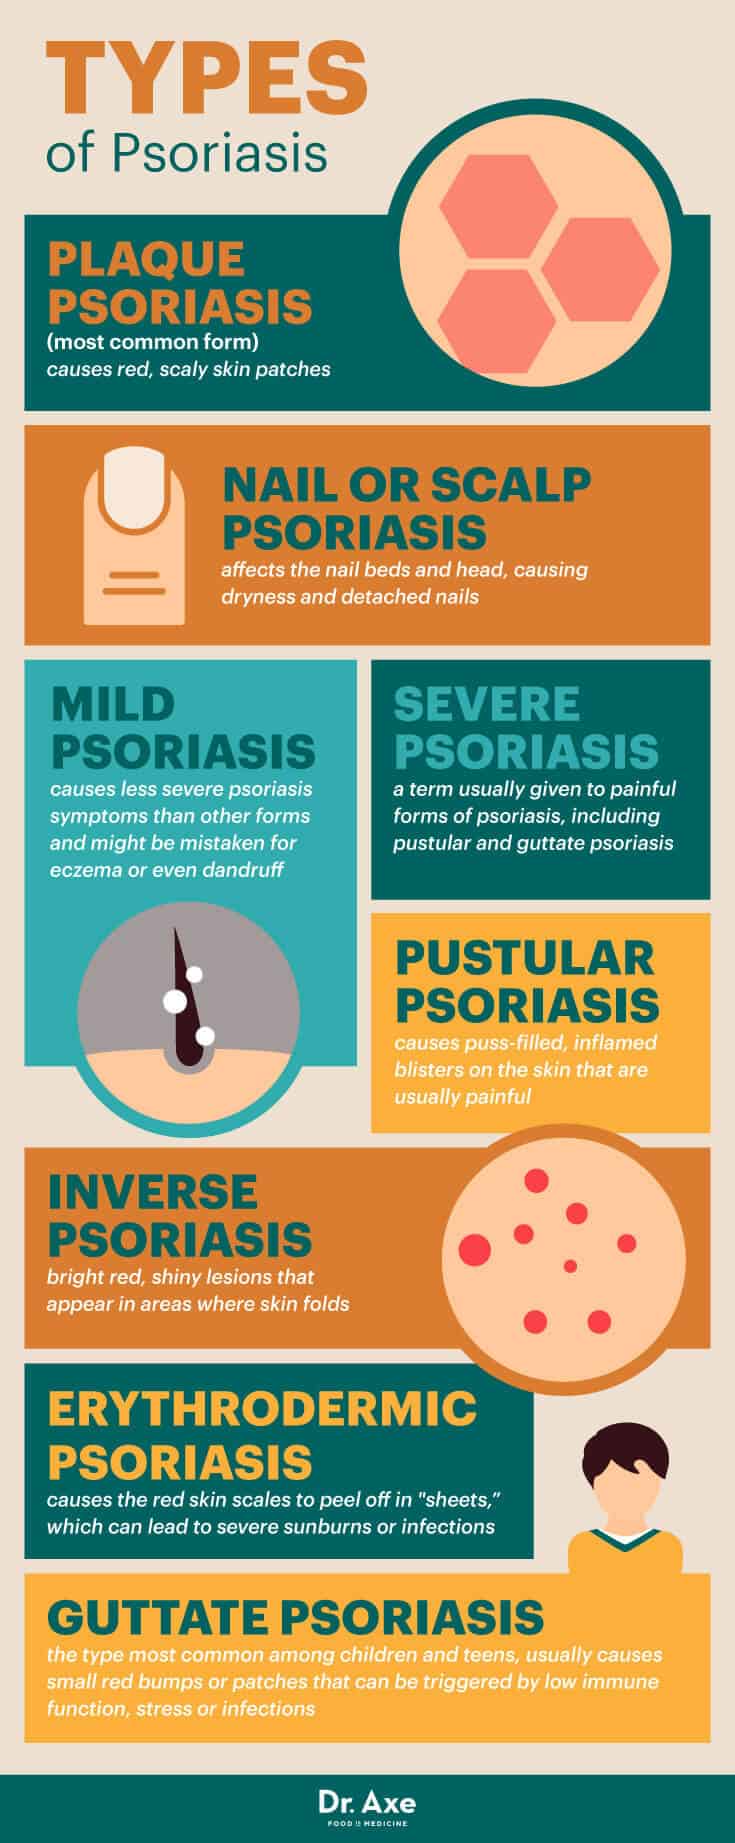 Types of psoriasis - Dr. Axe